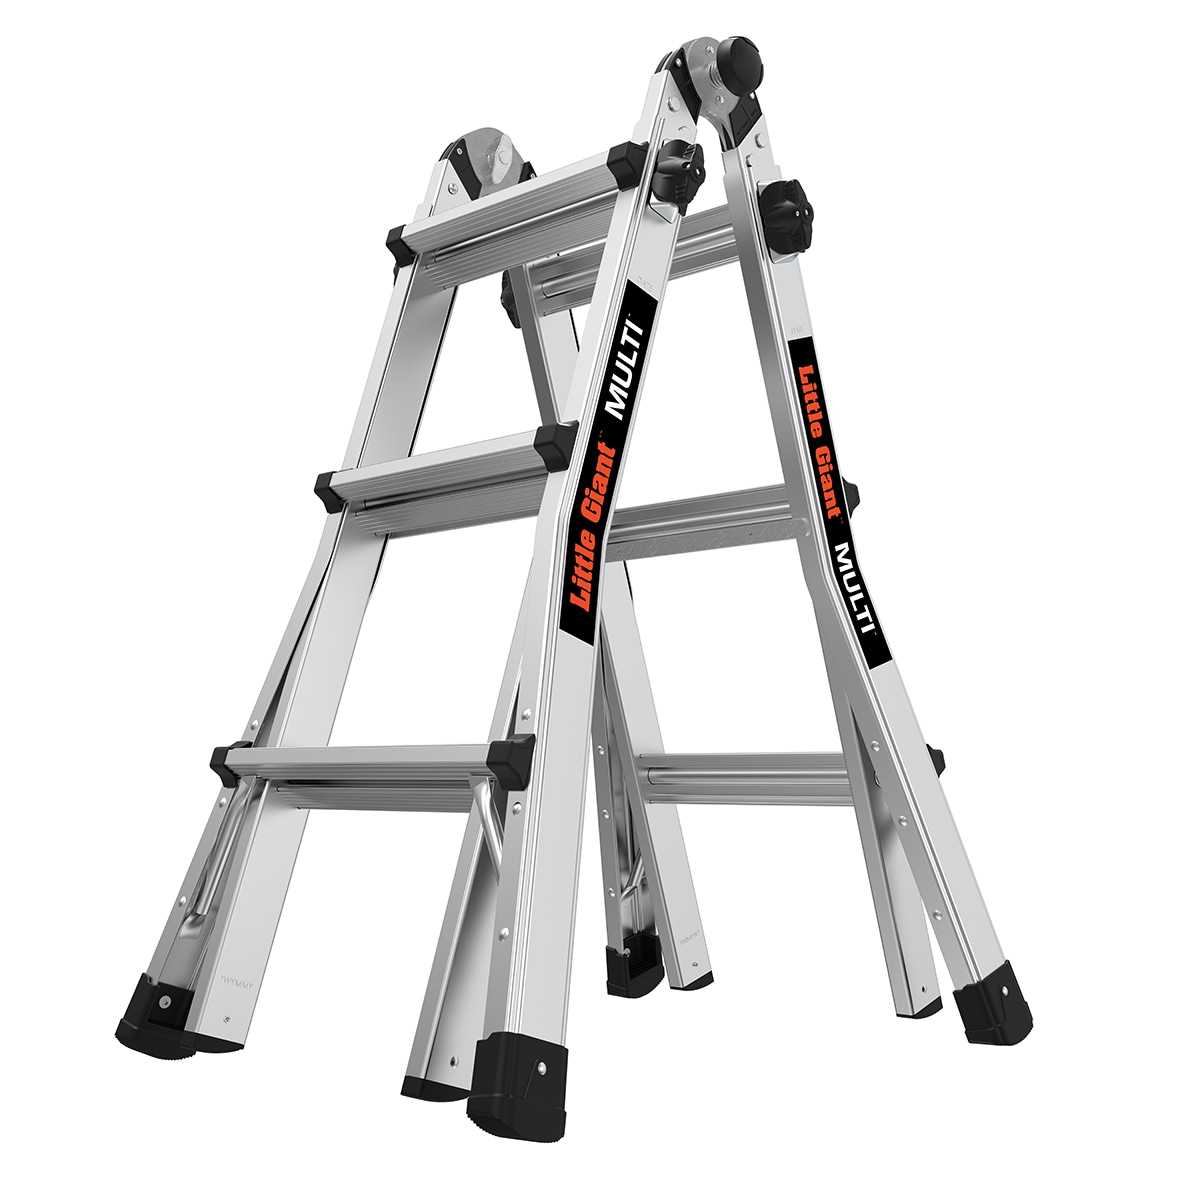 Little Giant Ladders Multi M14 14.3-ft Reach Type 1a- 300-lb Load Capacity Telescoping Multi-Position Ladder | 16513-002